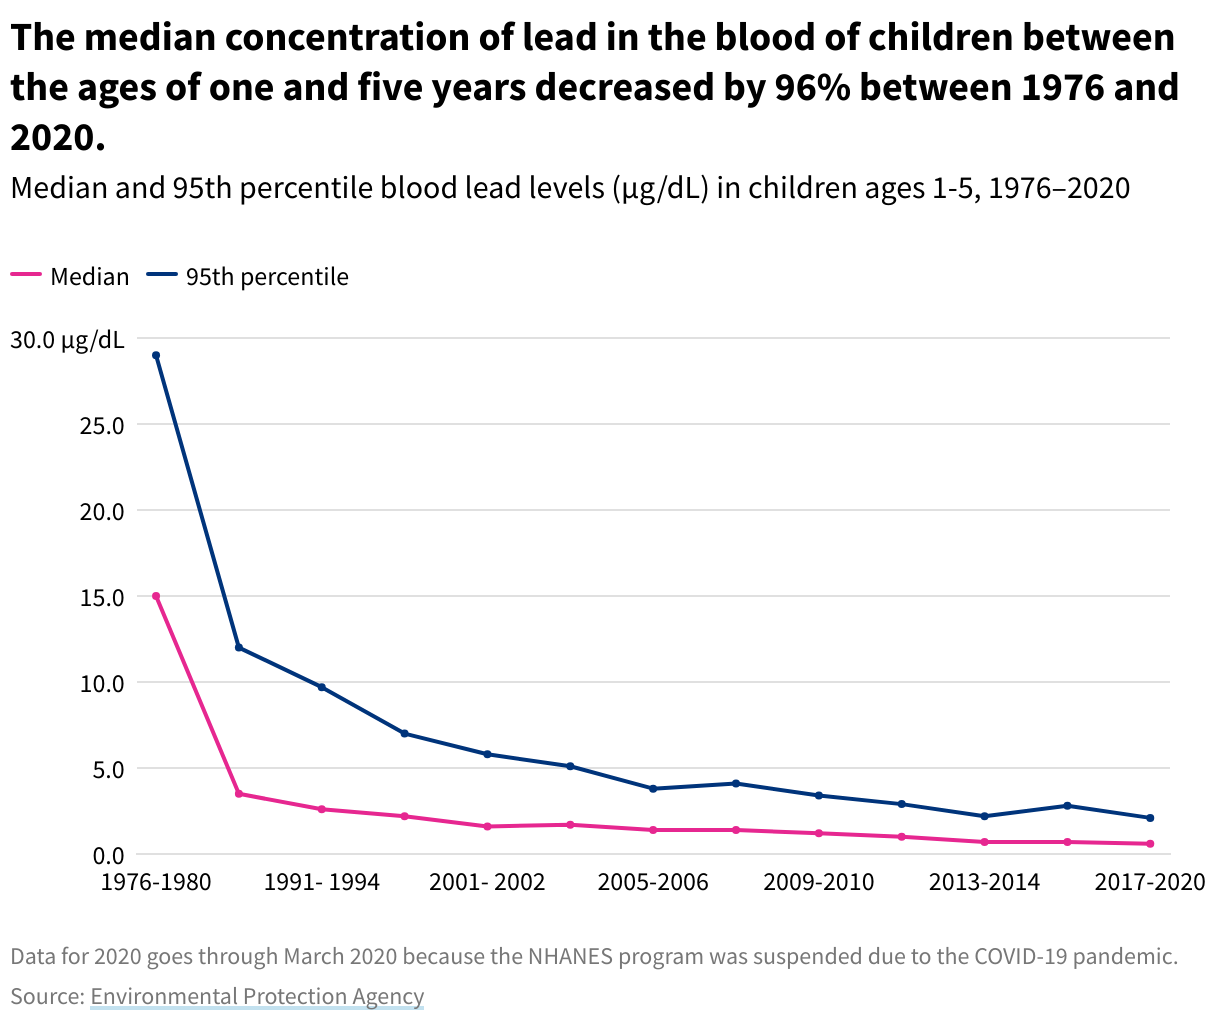 Line chart comparing the Median and 95th percentile lead concentrations in blood in children ages one to five years. The median concentration of lead in the blood of children between the ages of one and five years decreased by 96% between 1976 and 2020.